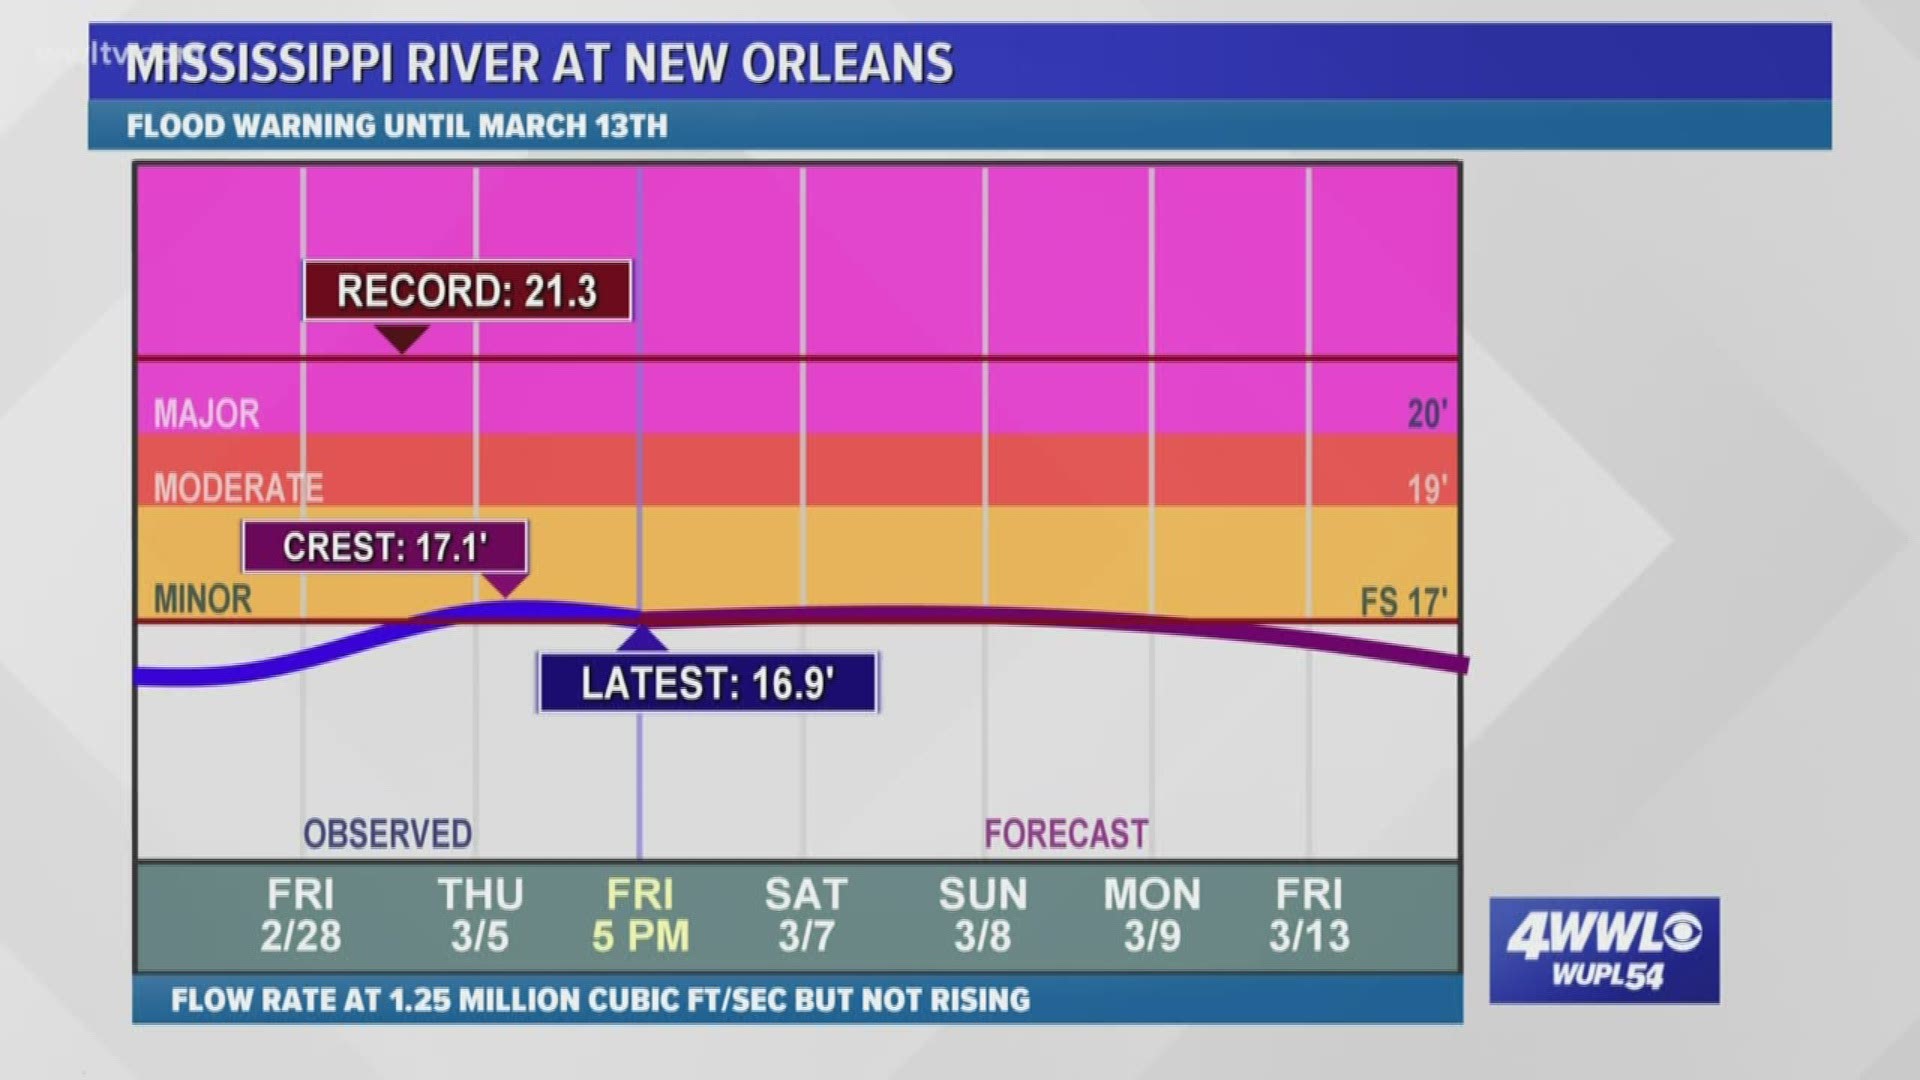 The river reached minor flood stage (17 feet) at the New Orleans Carrollton gauge and is expected to remain at that level until March 12.